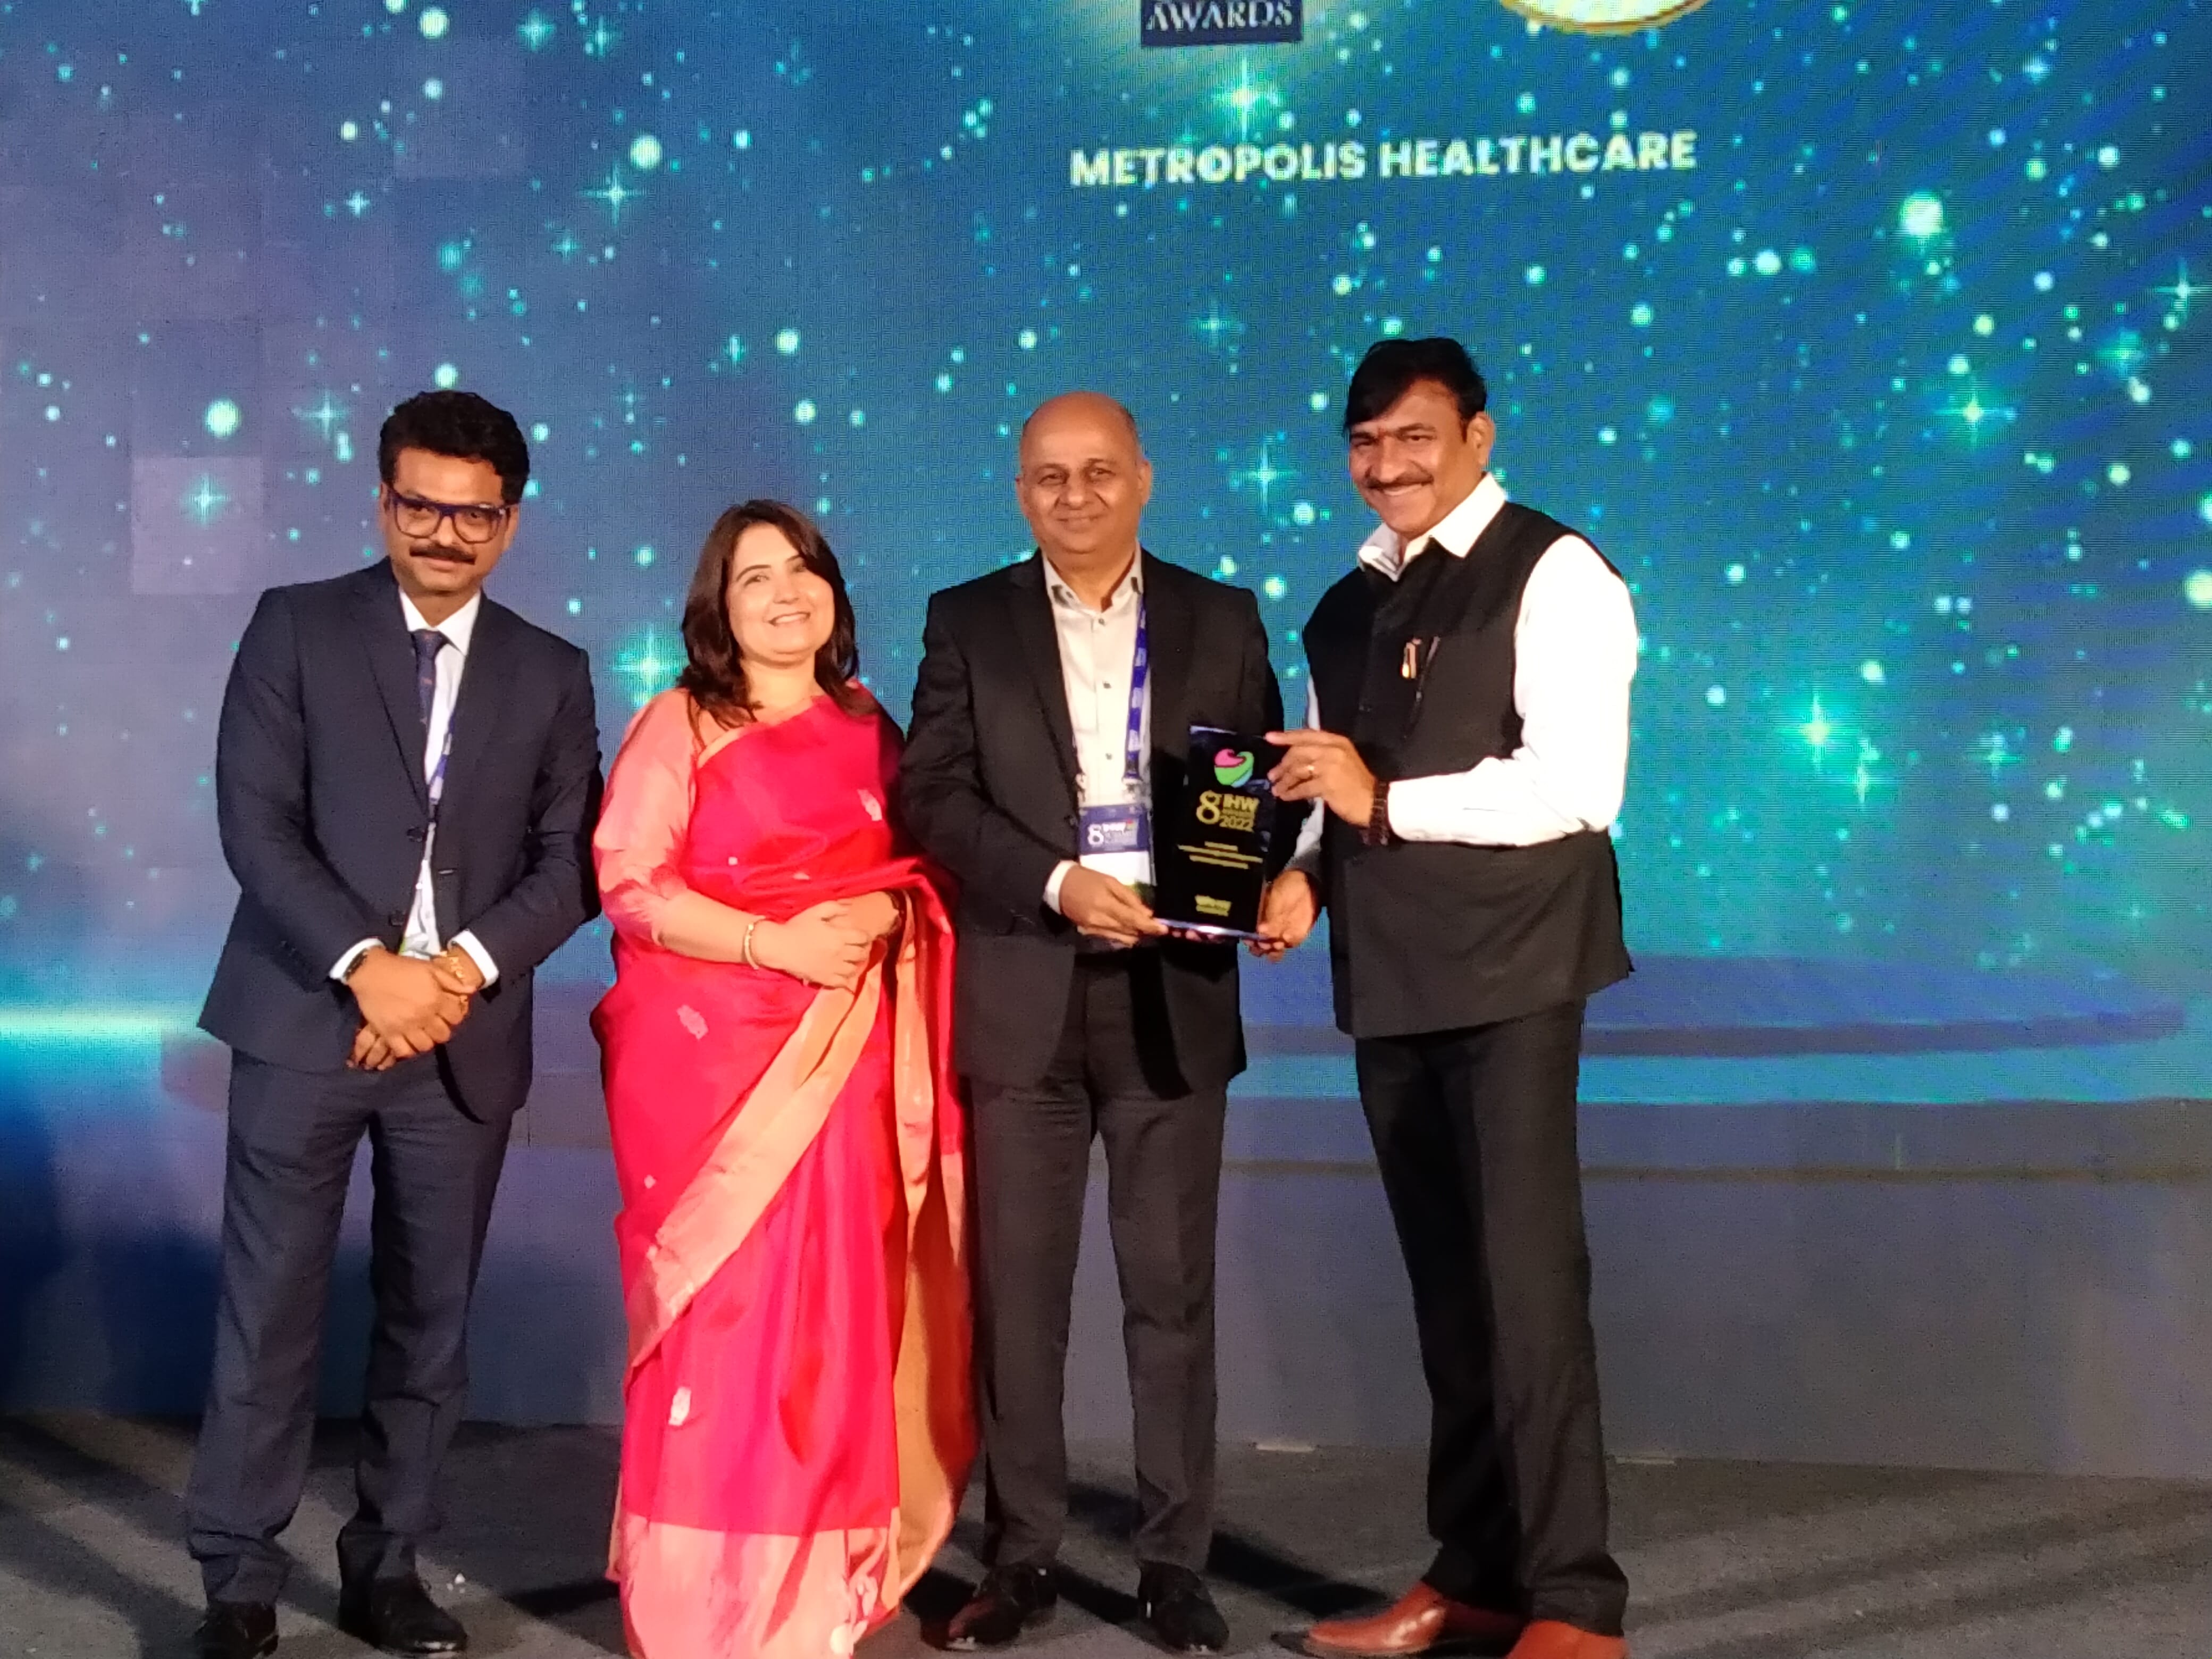 ‘Gold’ Award for Excellence in High-end Diagnostics